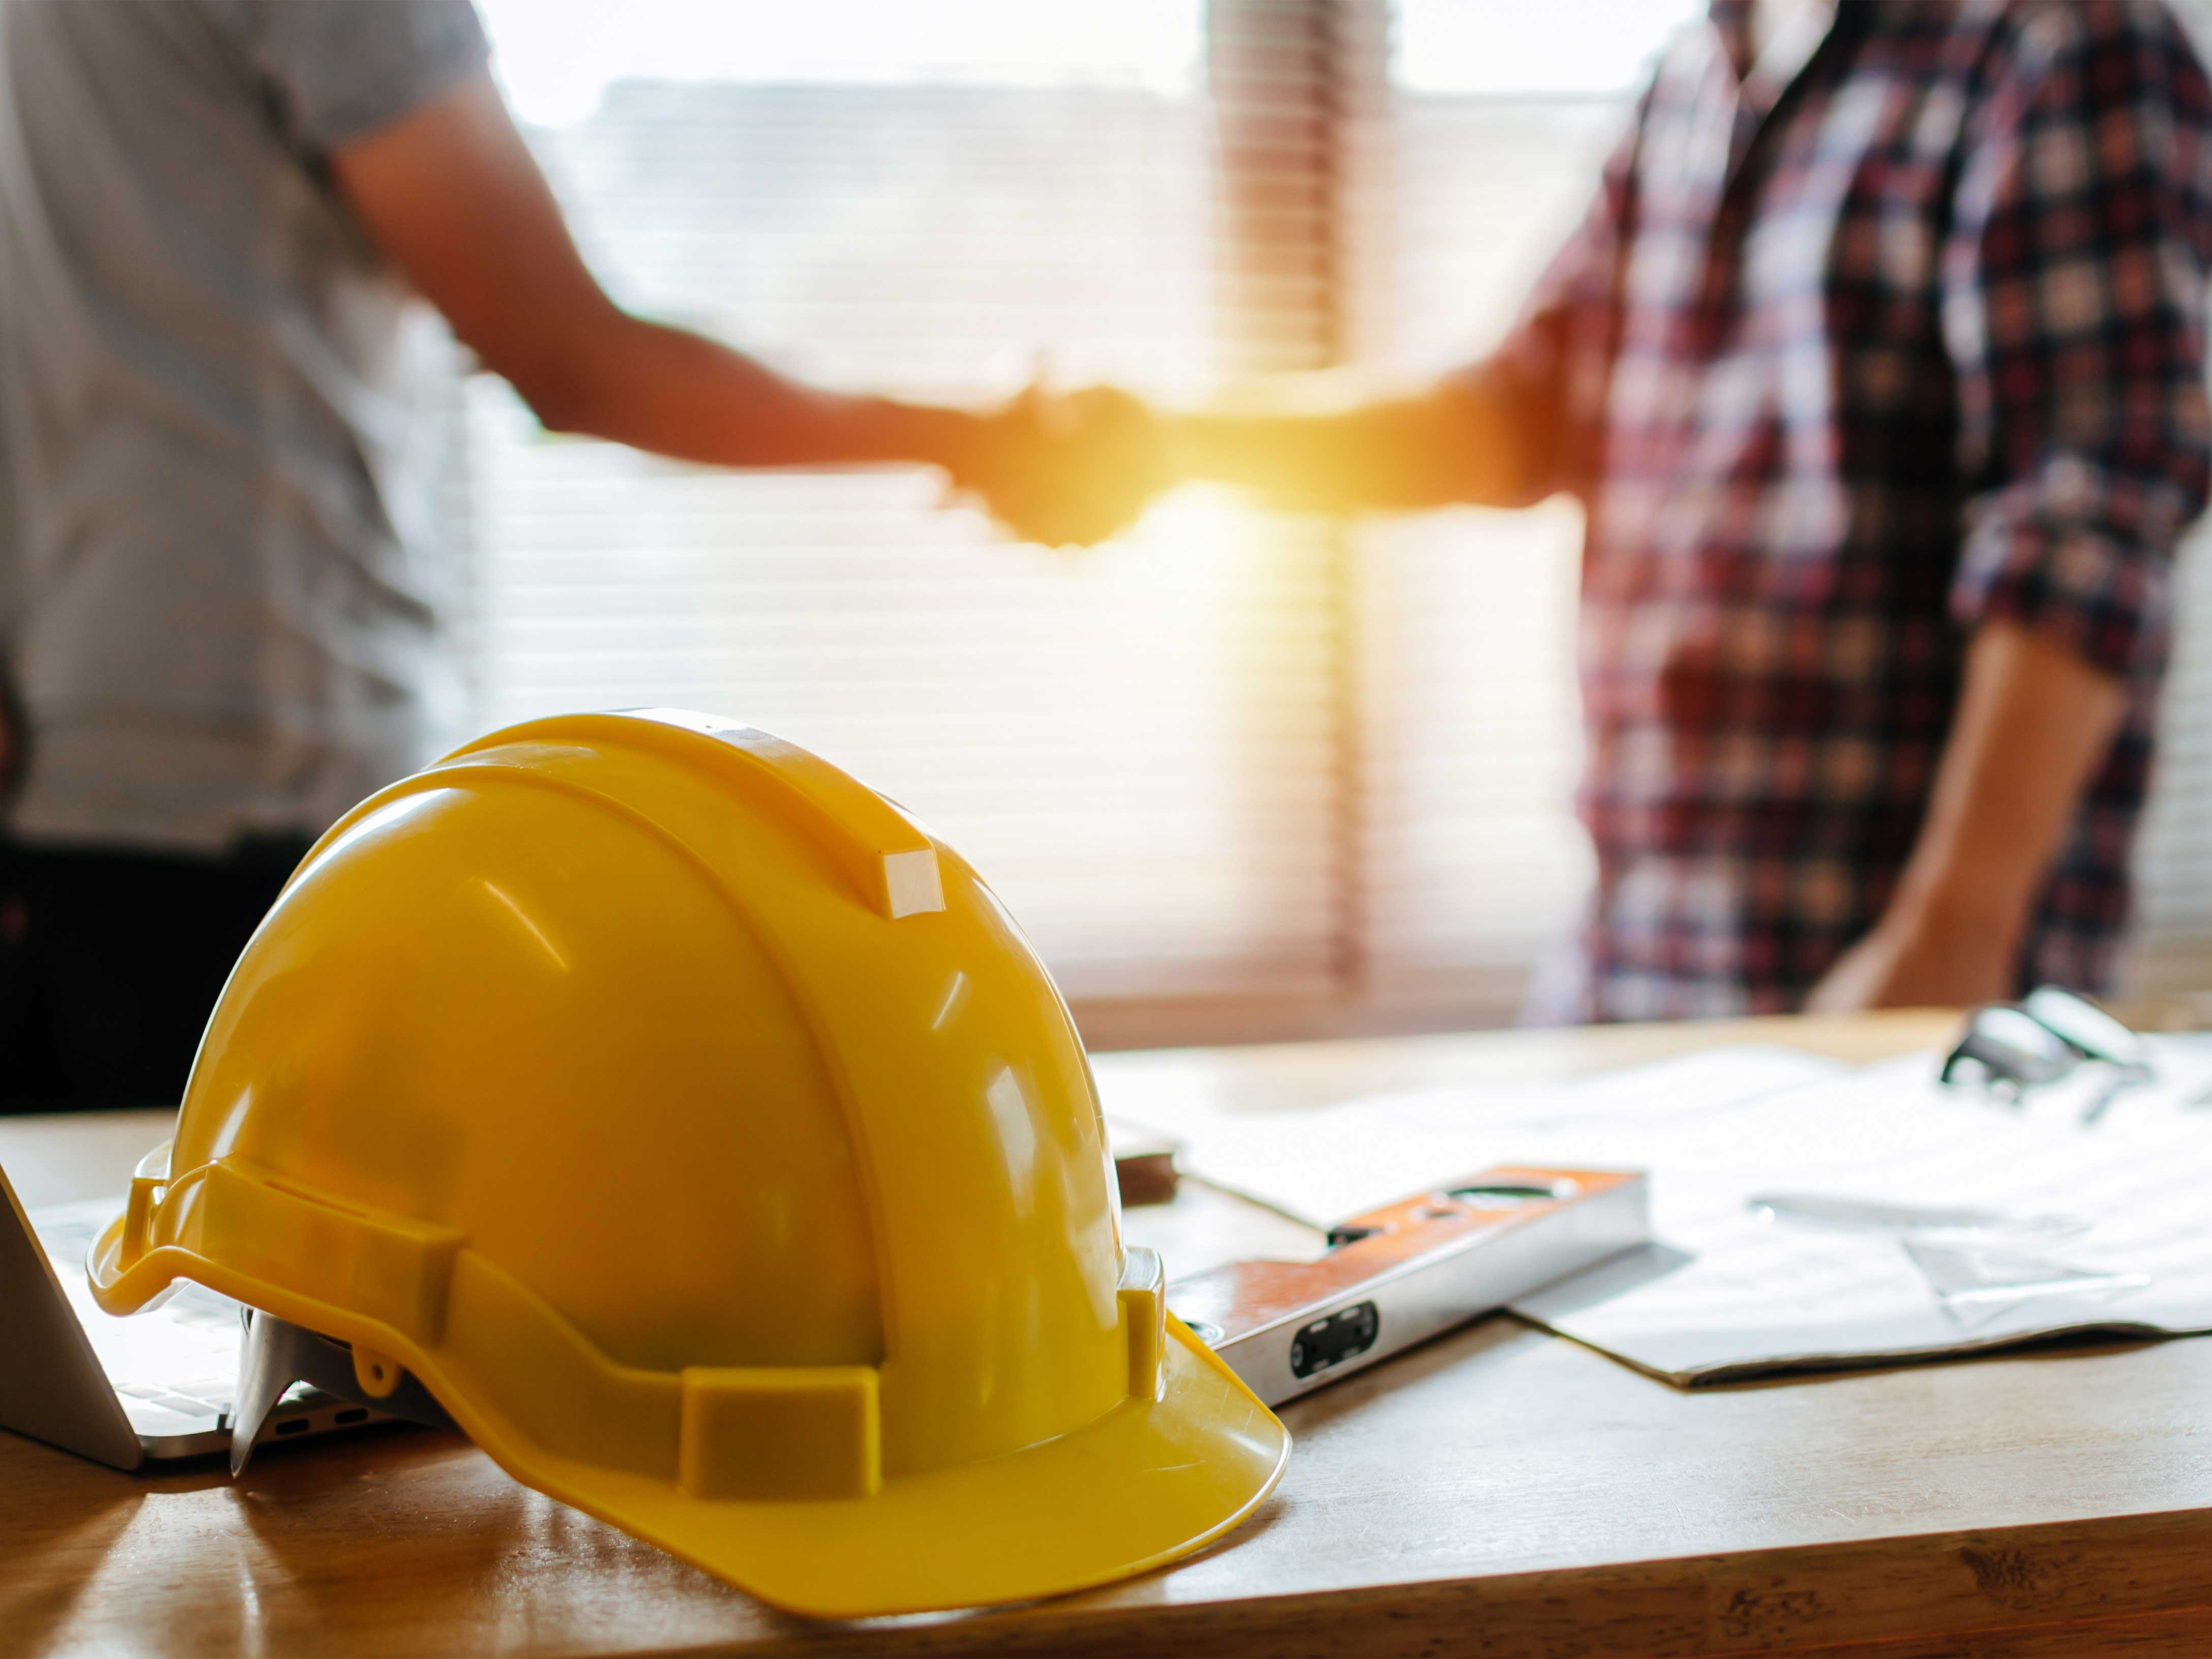 Contracting for civil construction works – are you getting the deal you bargained for?